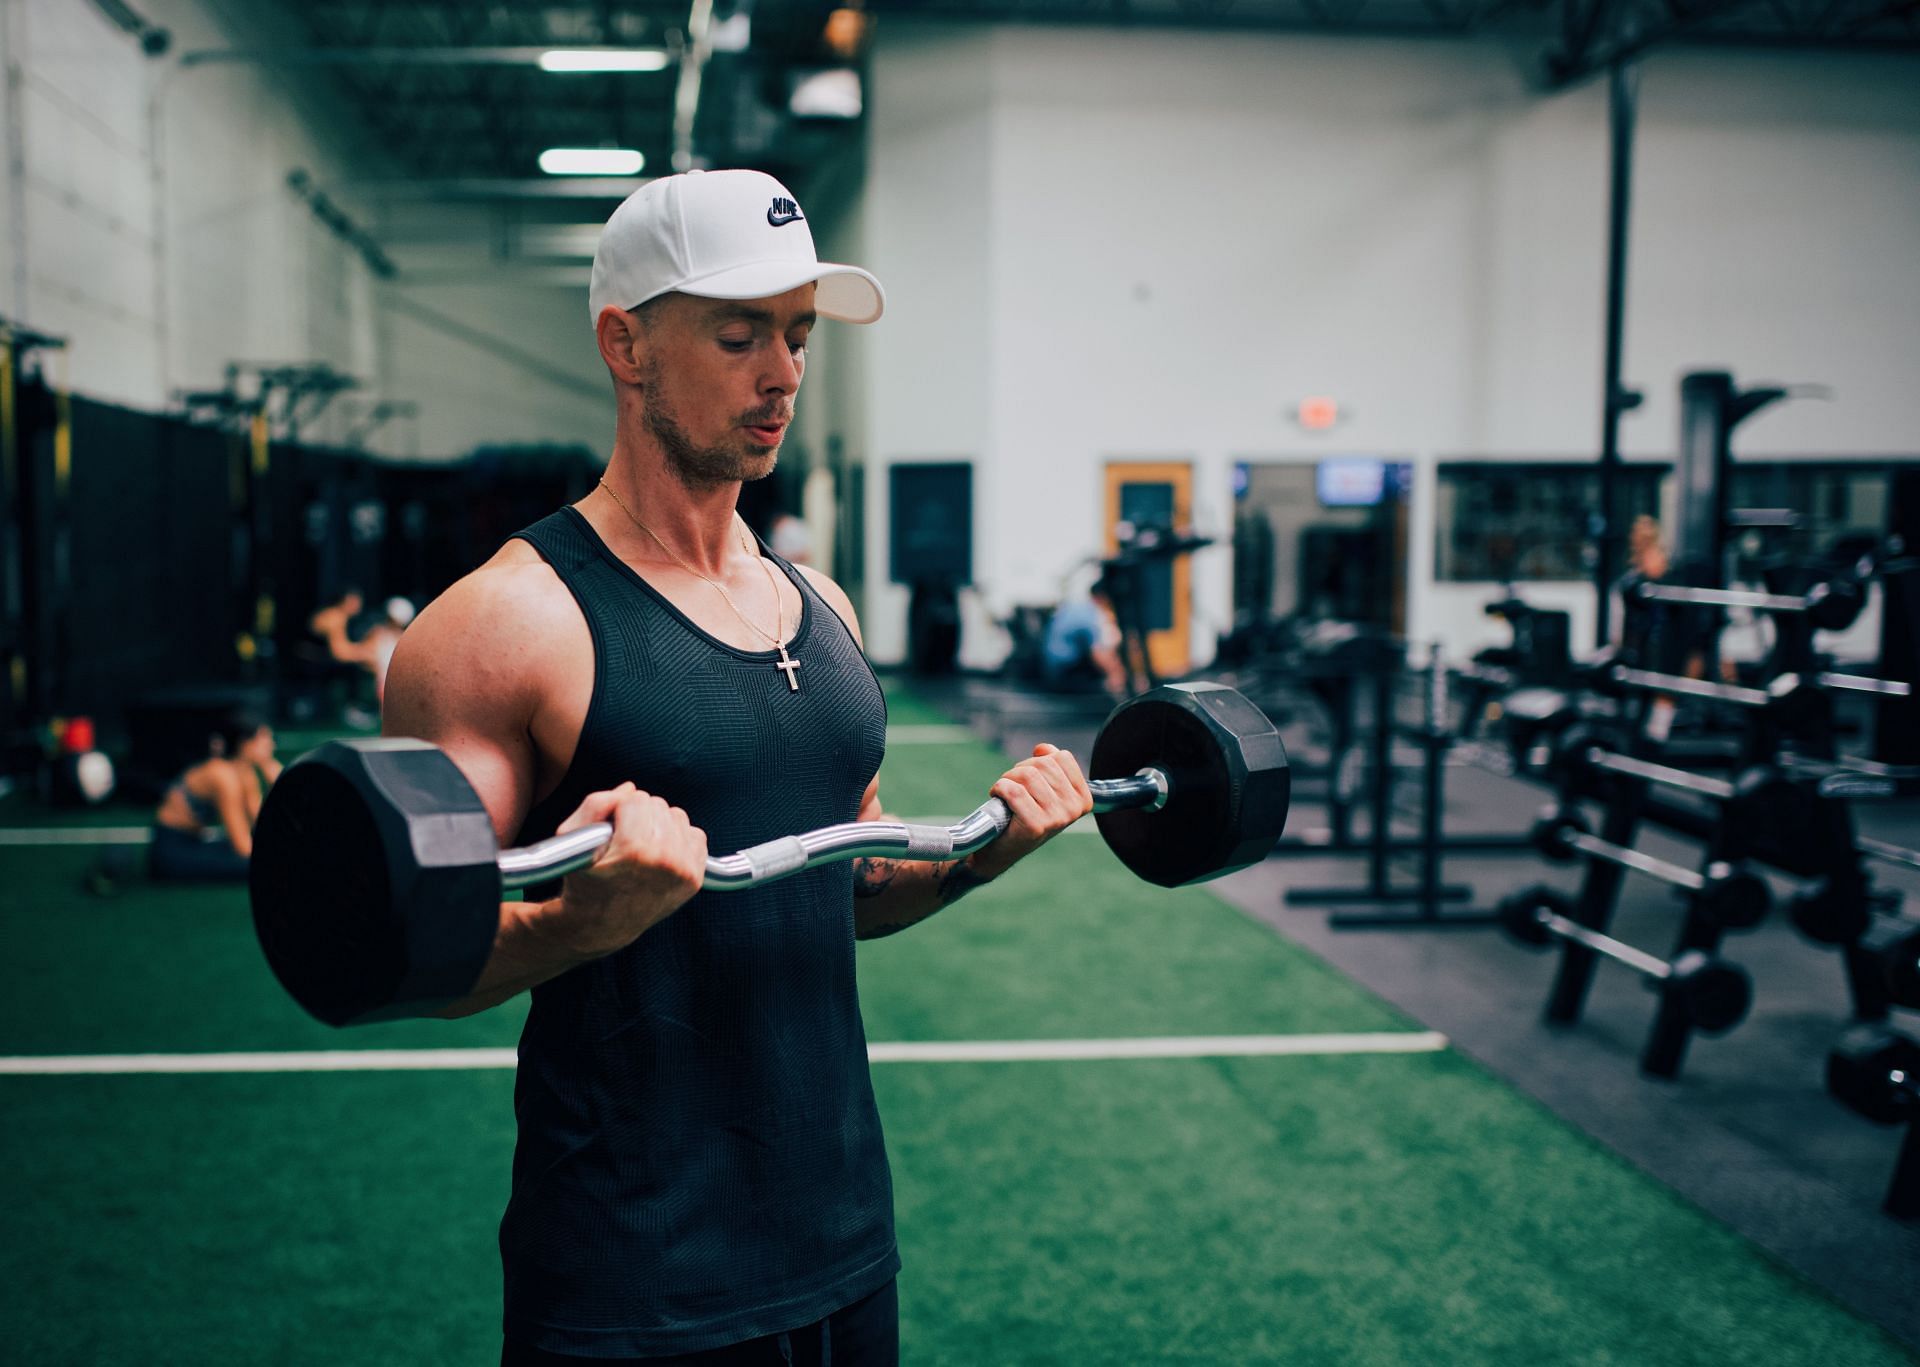 You willneed a few dumbbells or resistance-training items. (Photo: Unsplash/Gordon Cowie)